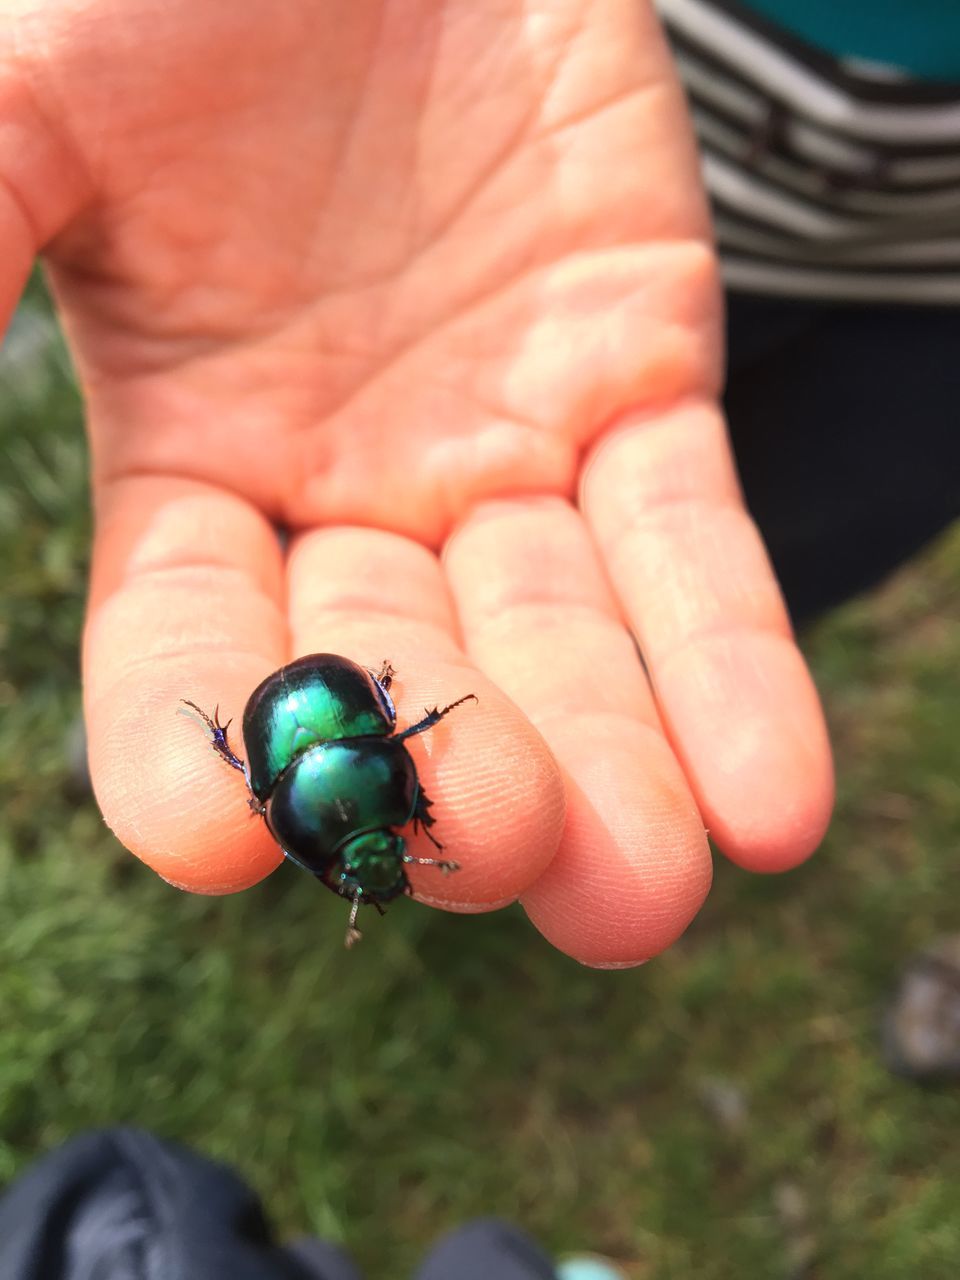 one animal, person, animals in the wild, close-up, wildlife, holding, focus on foreground, insect, human finger, day, outdoors, zoology, nature, tiny